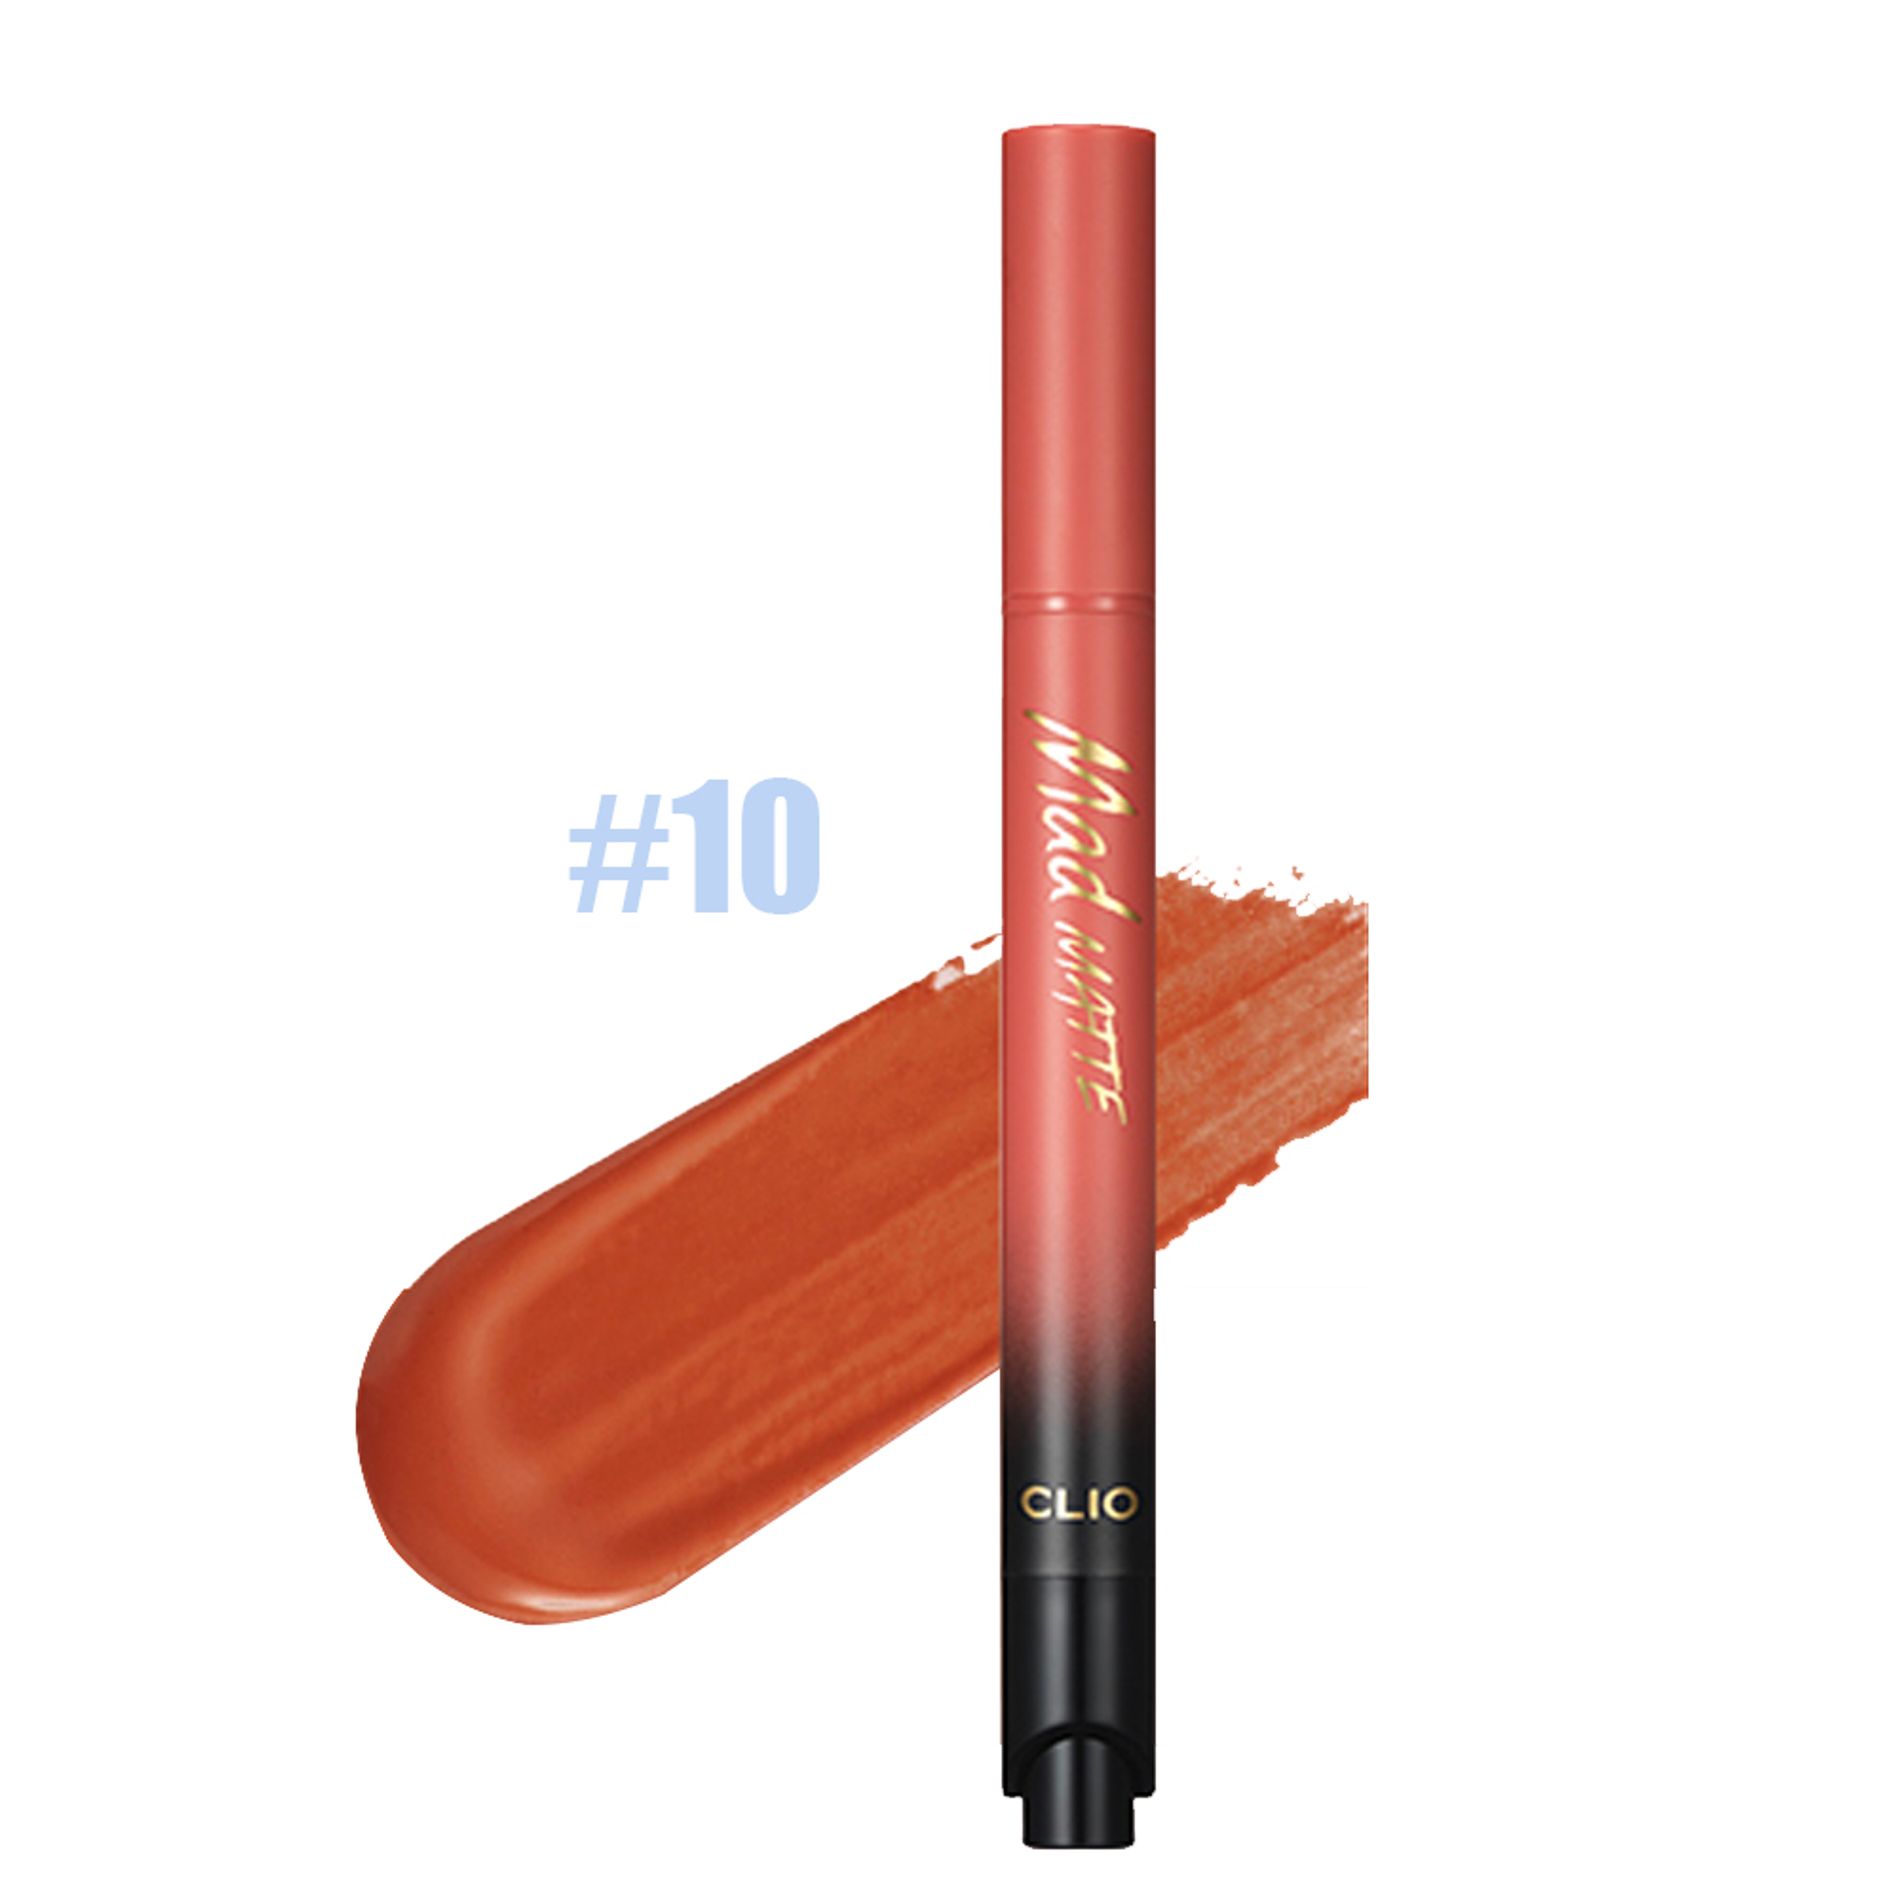 son-nuoc-dang-bam-clio-mad-matte-stain-tint-2g-15